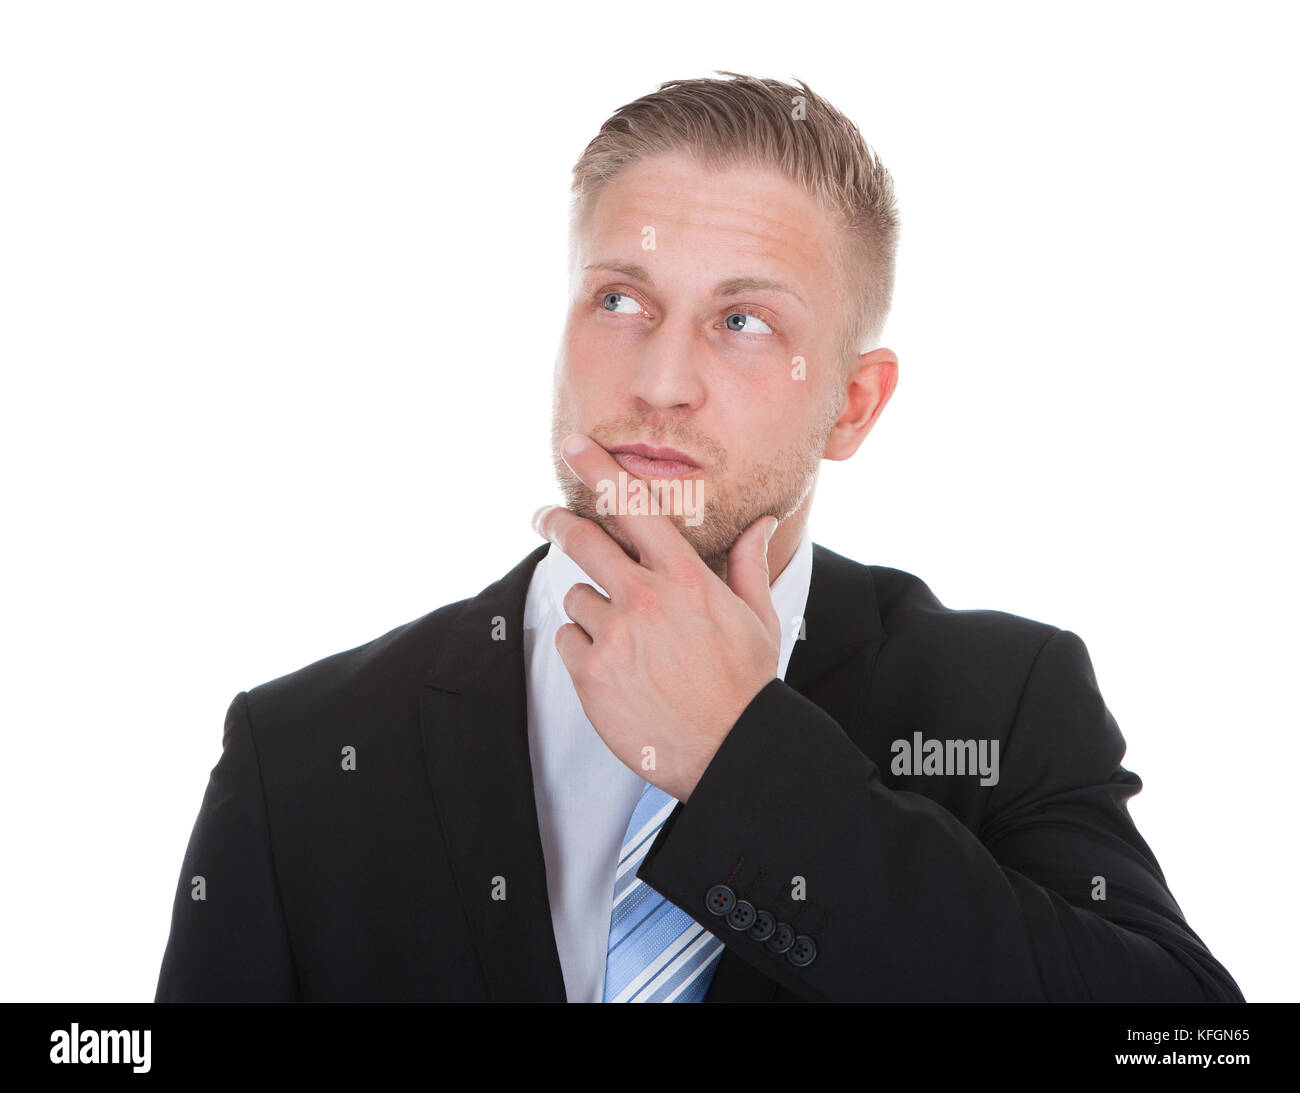 Businessman standing deep in thought with his hand to his chin looking up into the air with a look of contemplation isolated on white with copyspace Stock Photo